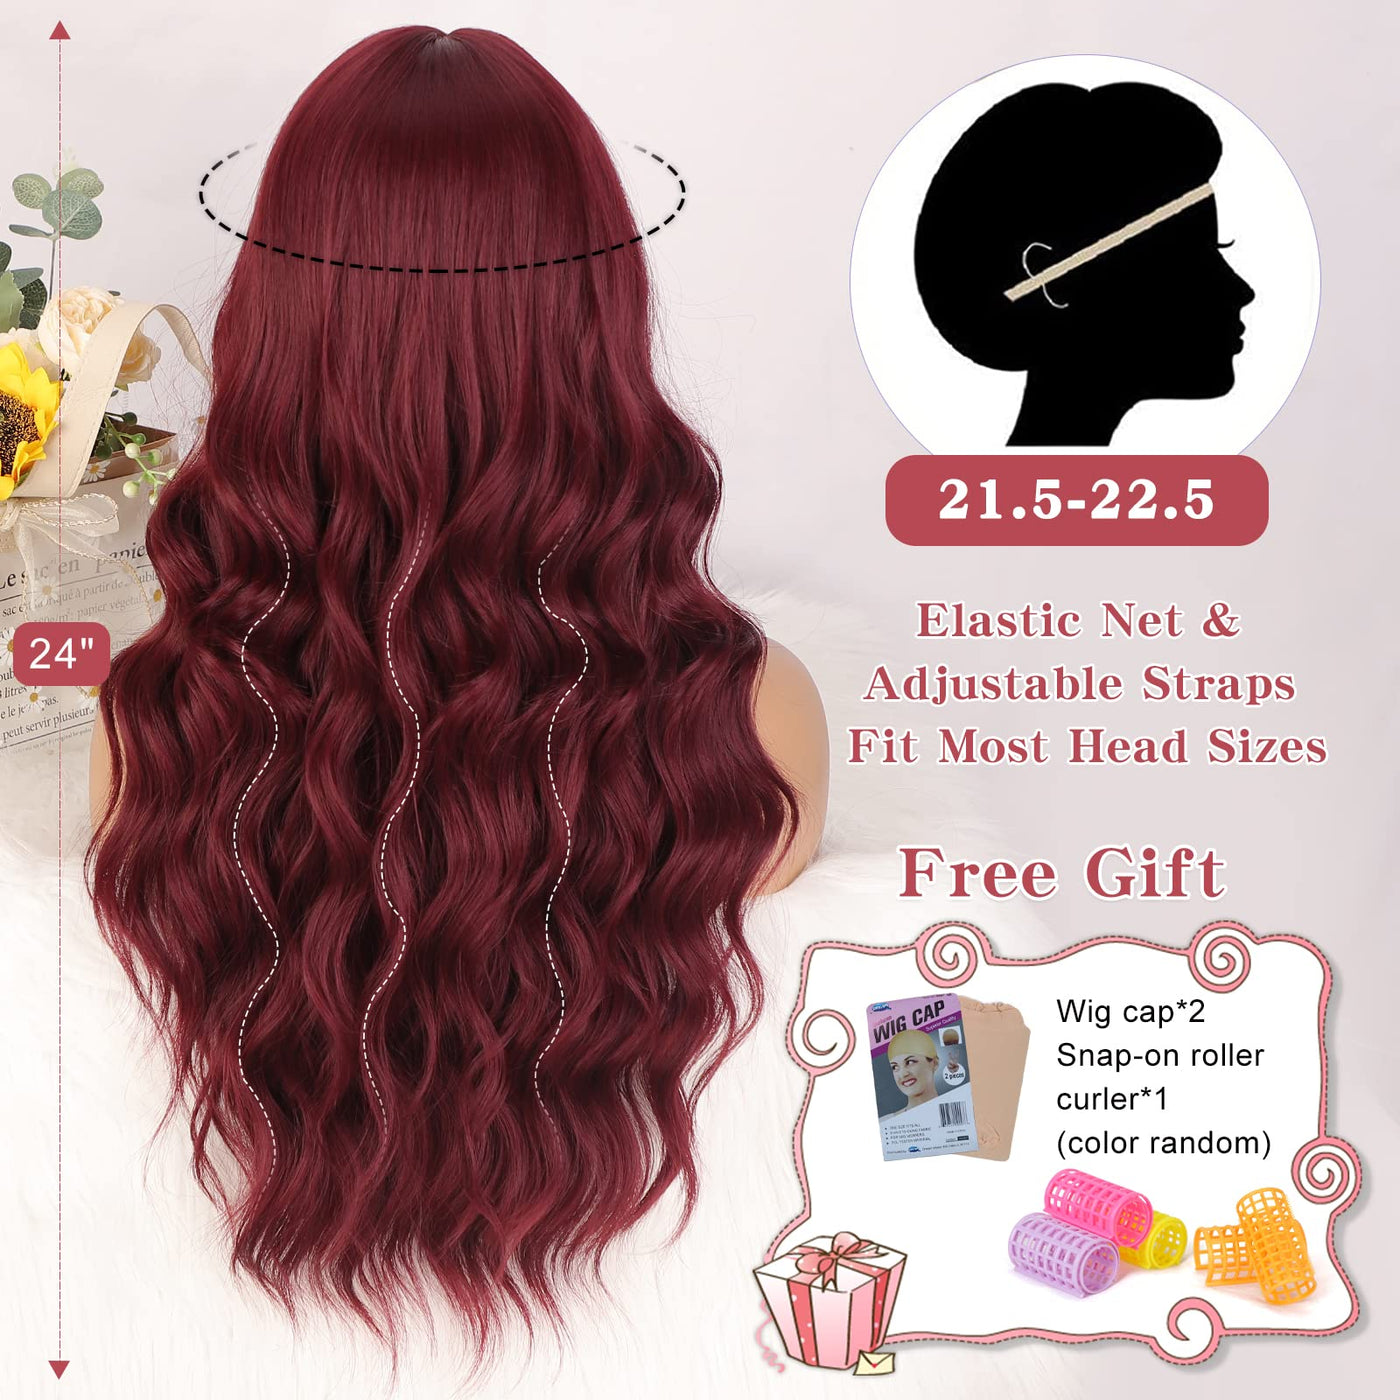 LKQee Long Wig with Bangs Wine Red Wavy Wigs for Women Synthetic Heat Resistant Fibre Burgundy Wigs for Girls Daily Party Use